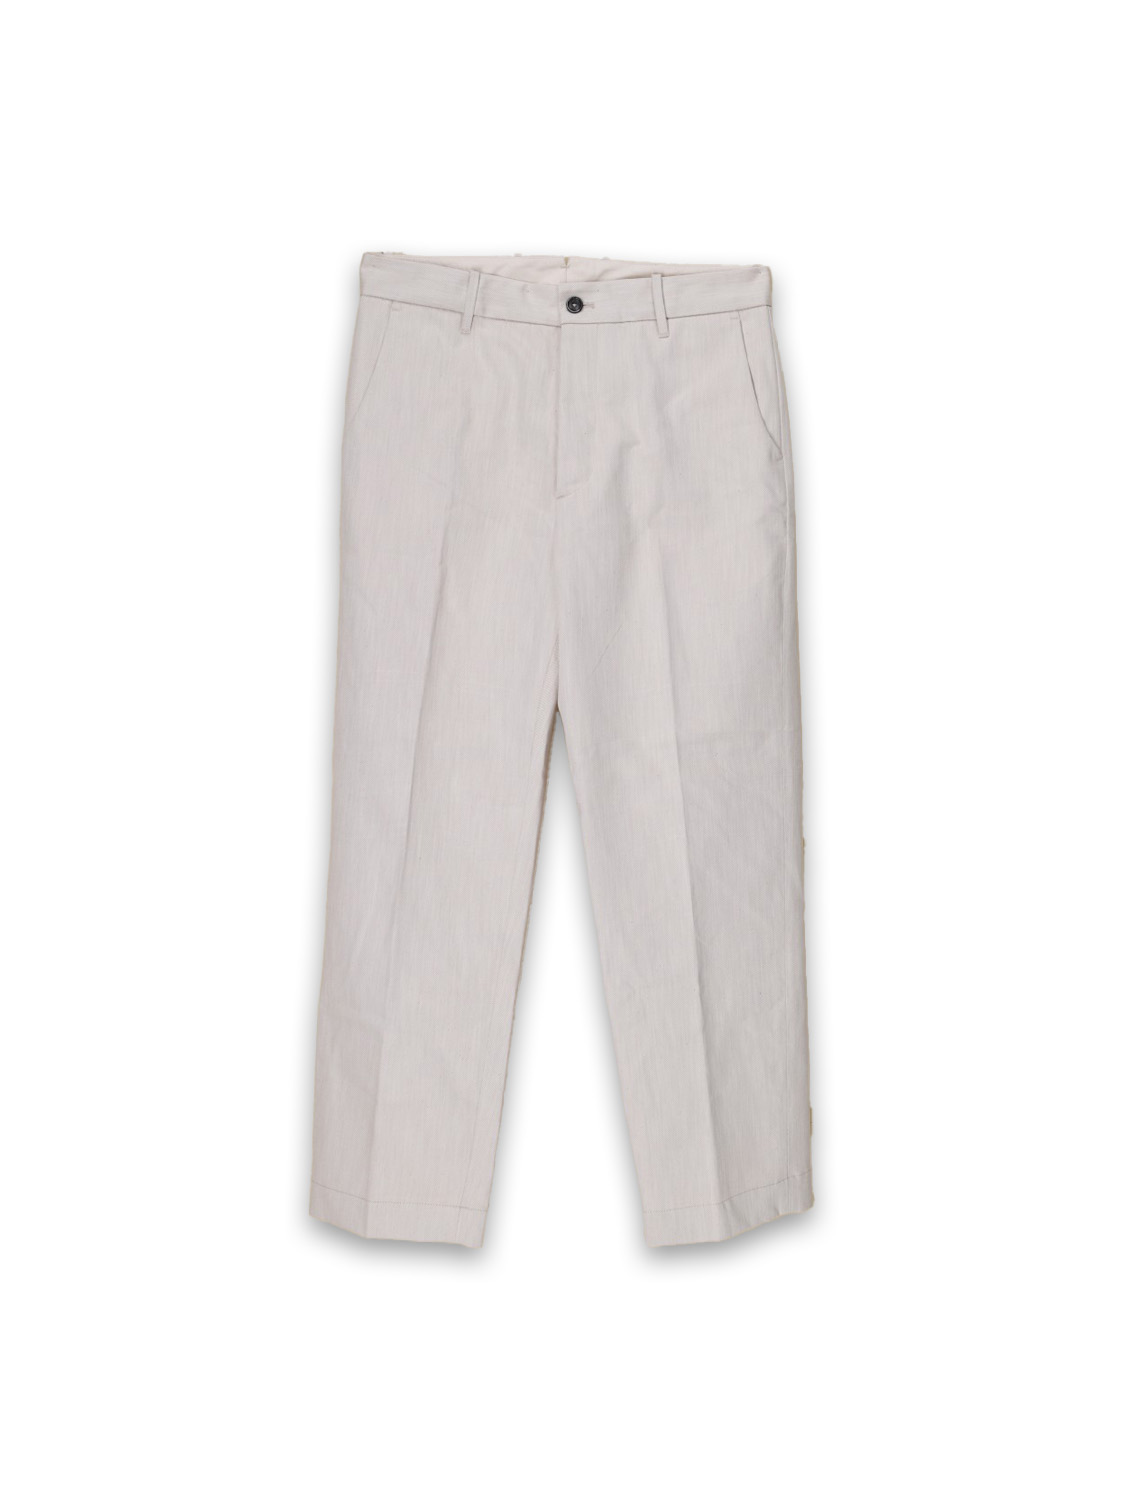 nine in the morning Apollon - Linen chino-style pants   beige 50